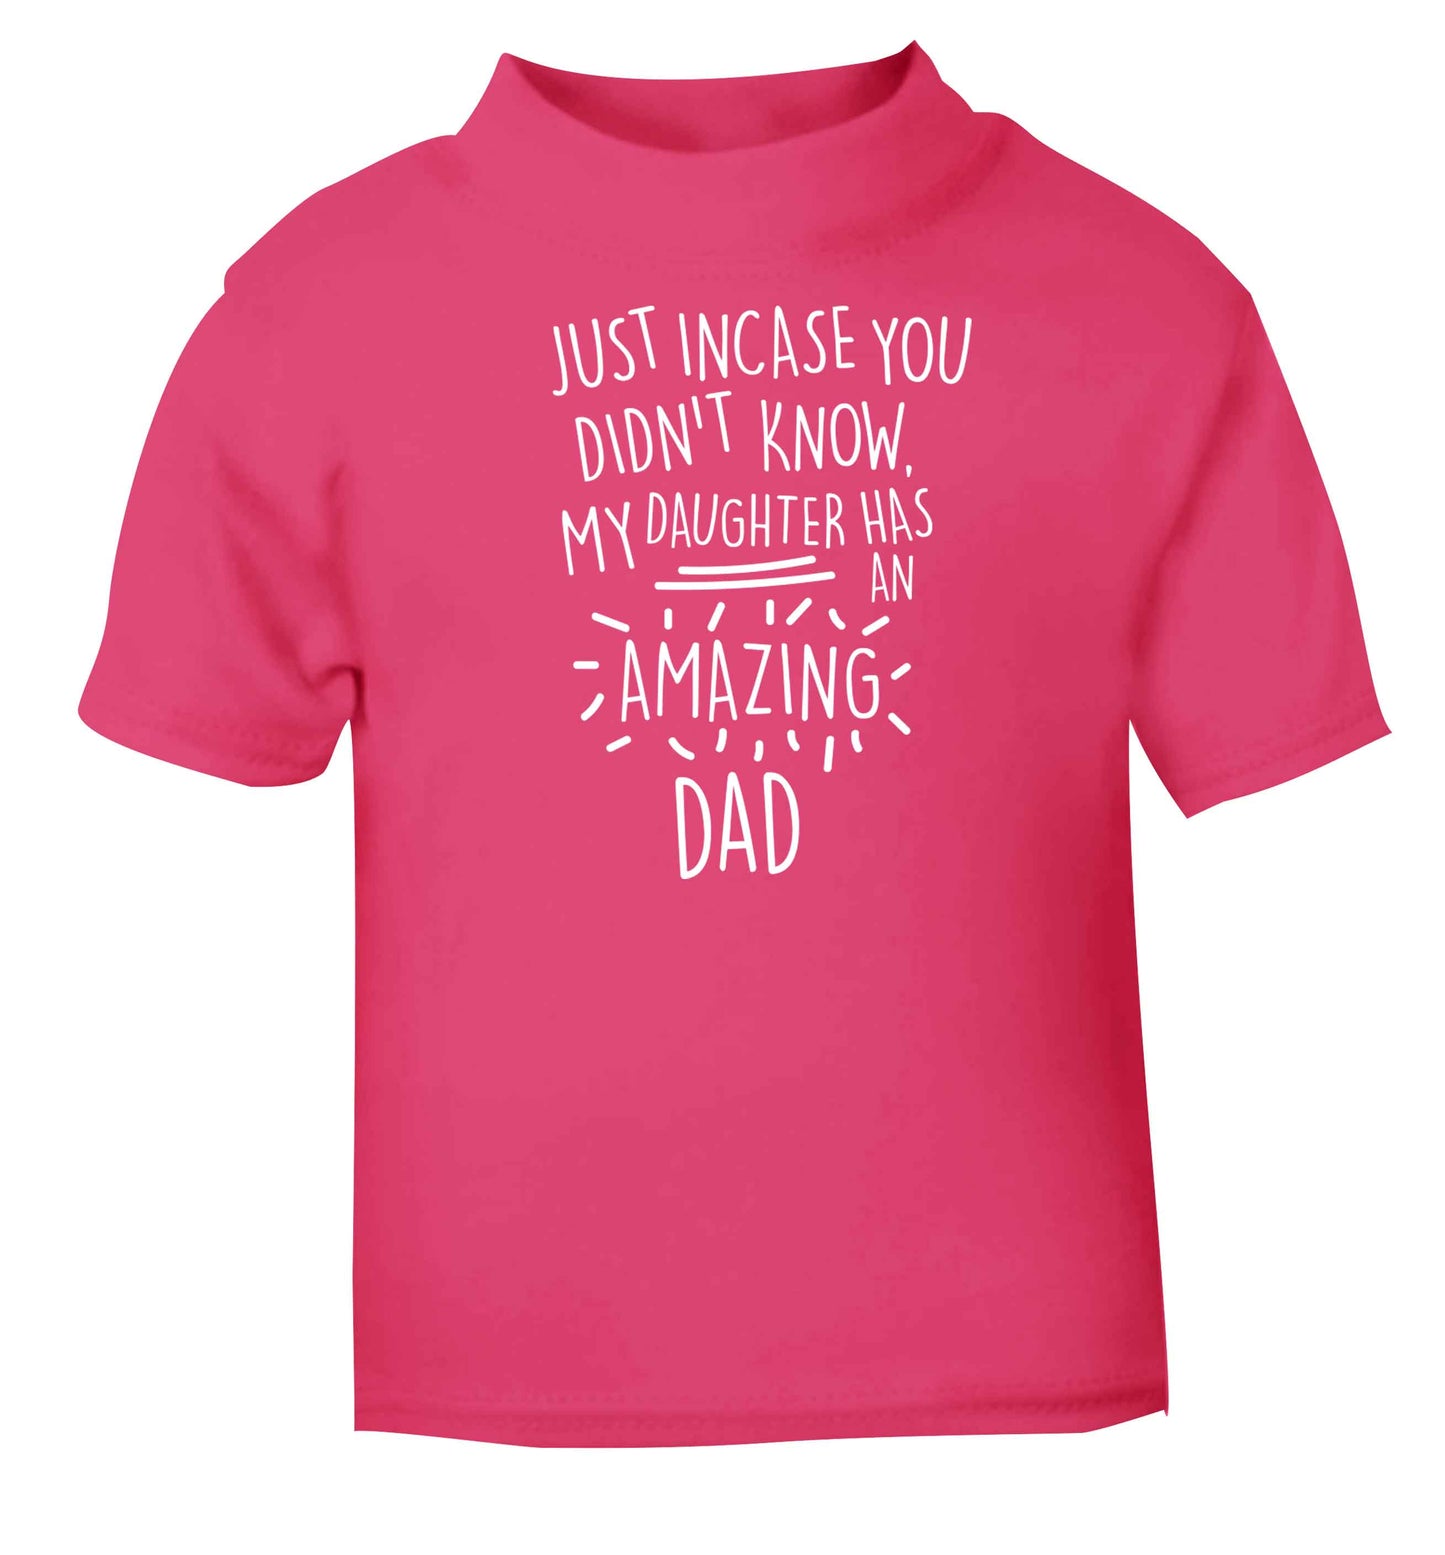 Just incase you didn't know my daughter has an amazing dad pink baby toddler Tshirt 2 Years